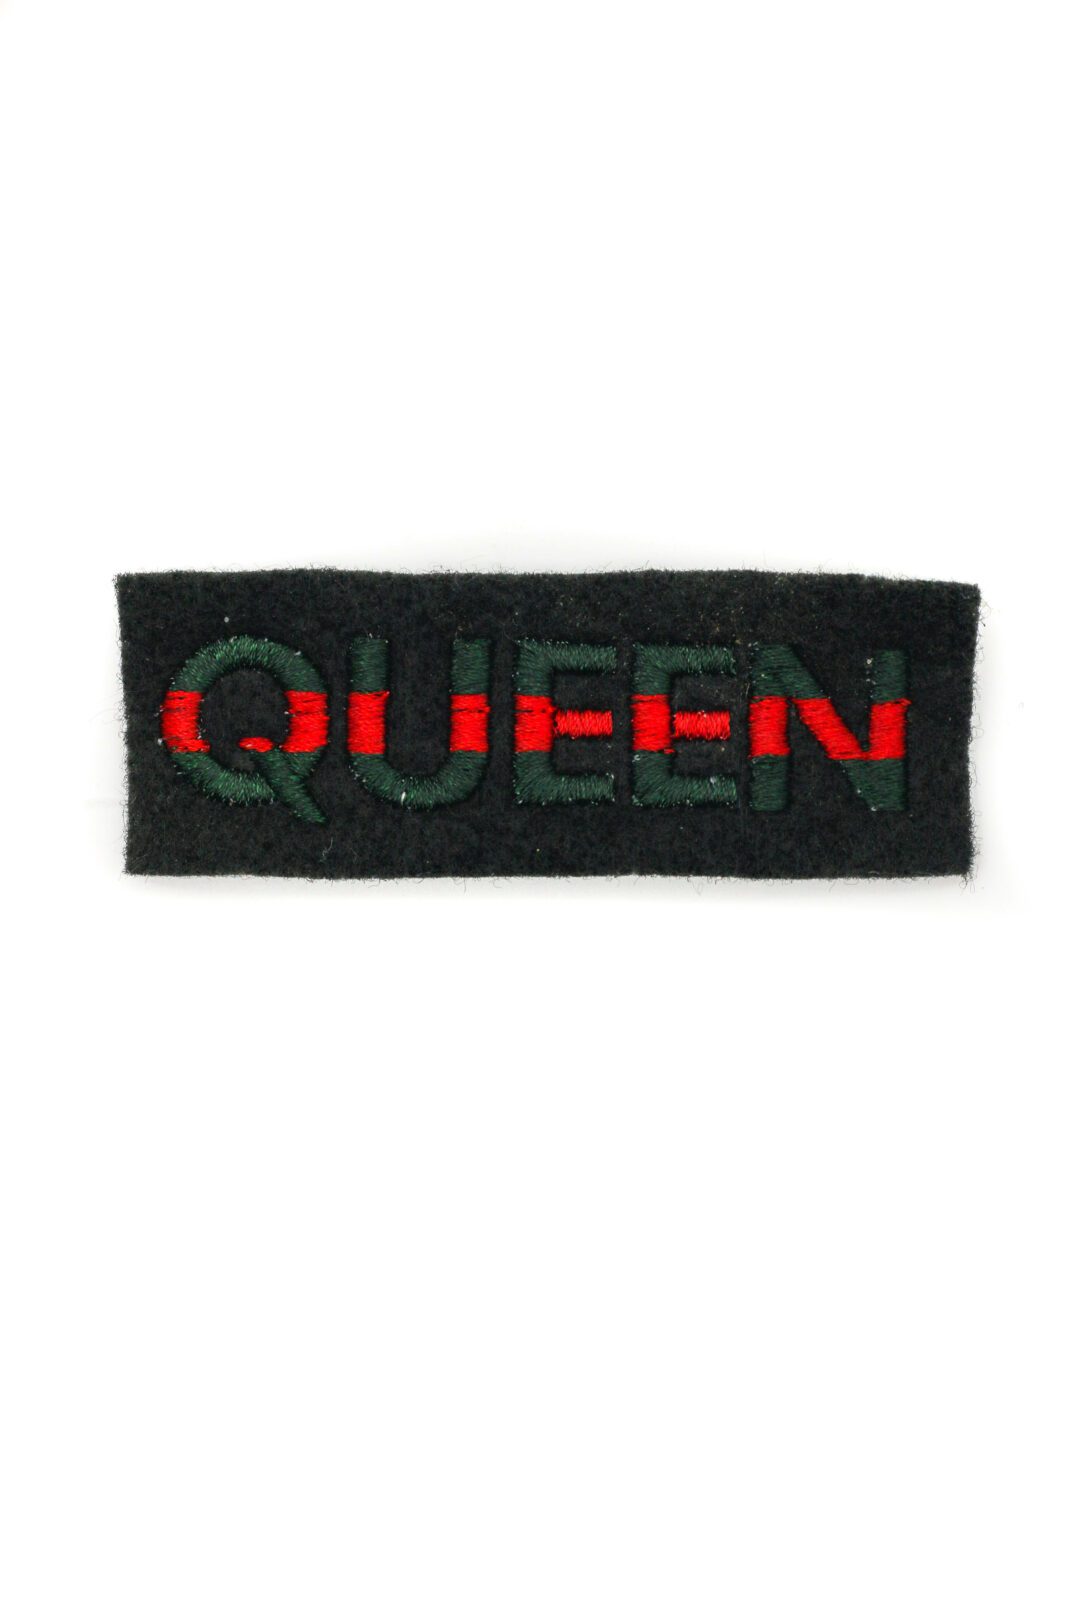 Queen iron on embroidery patches